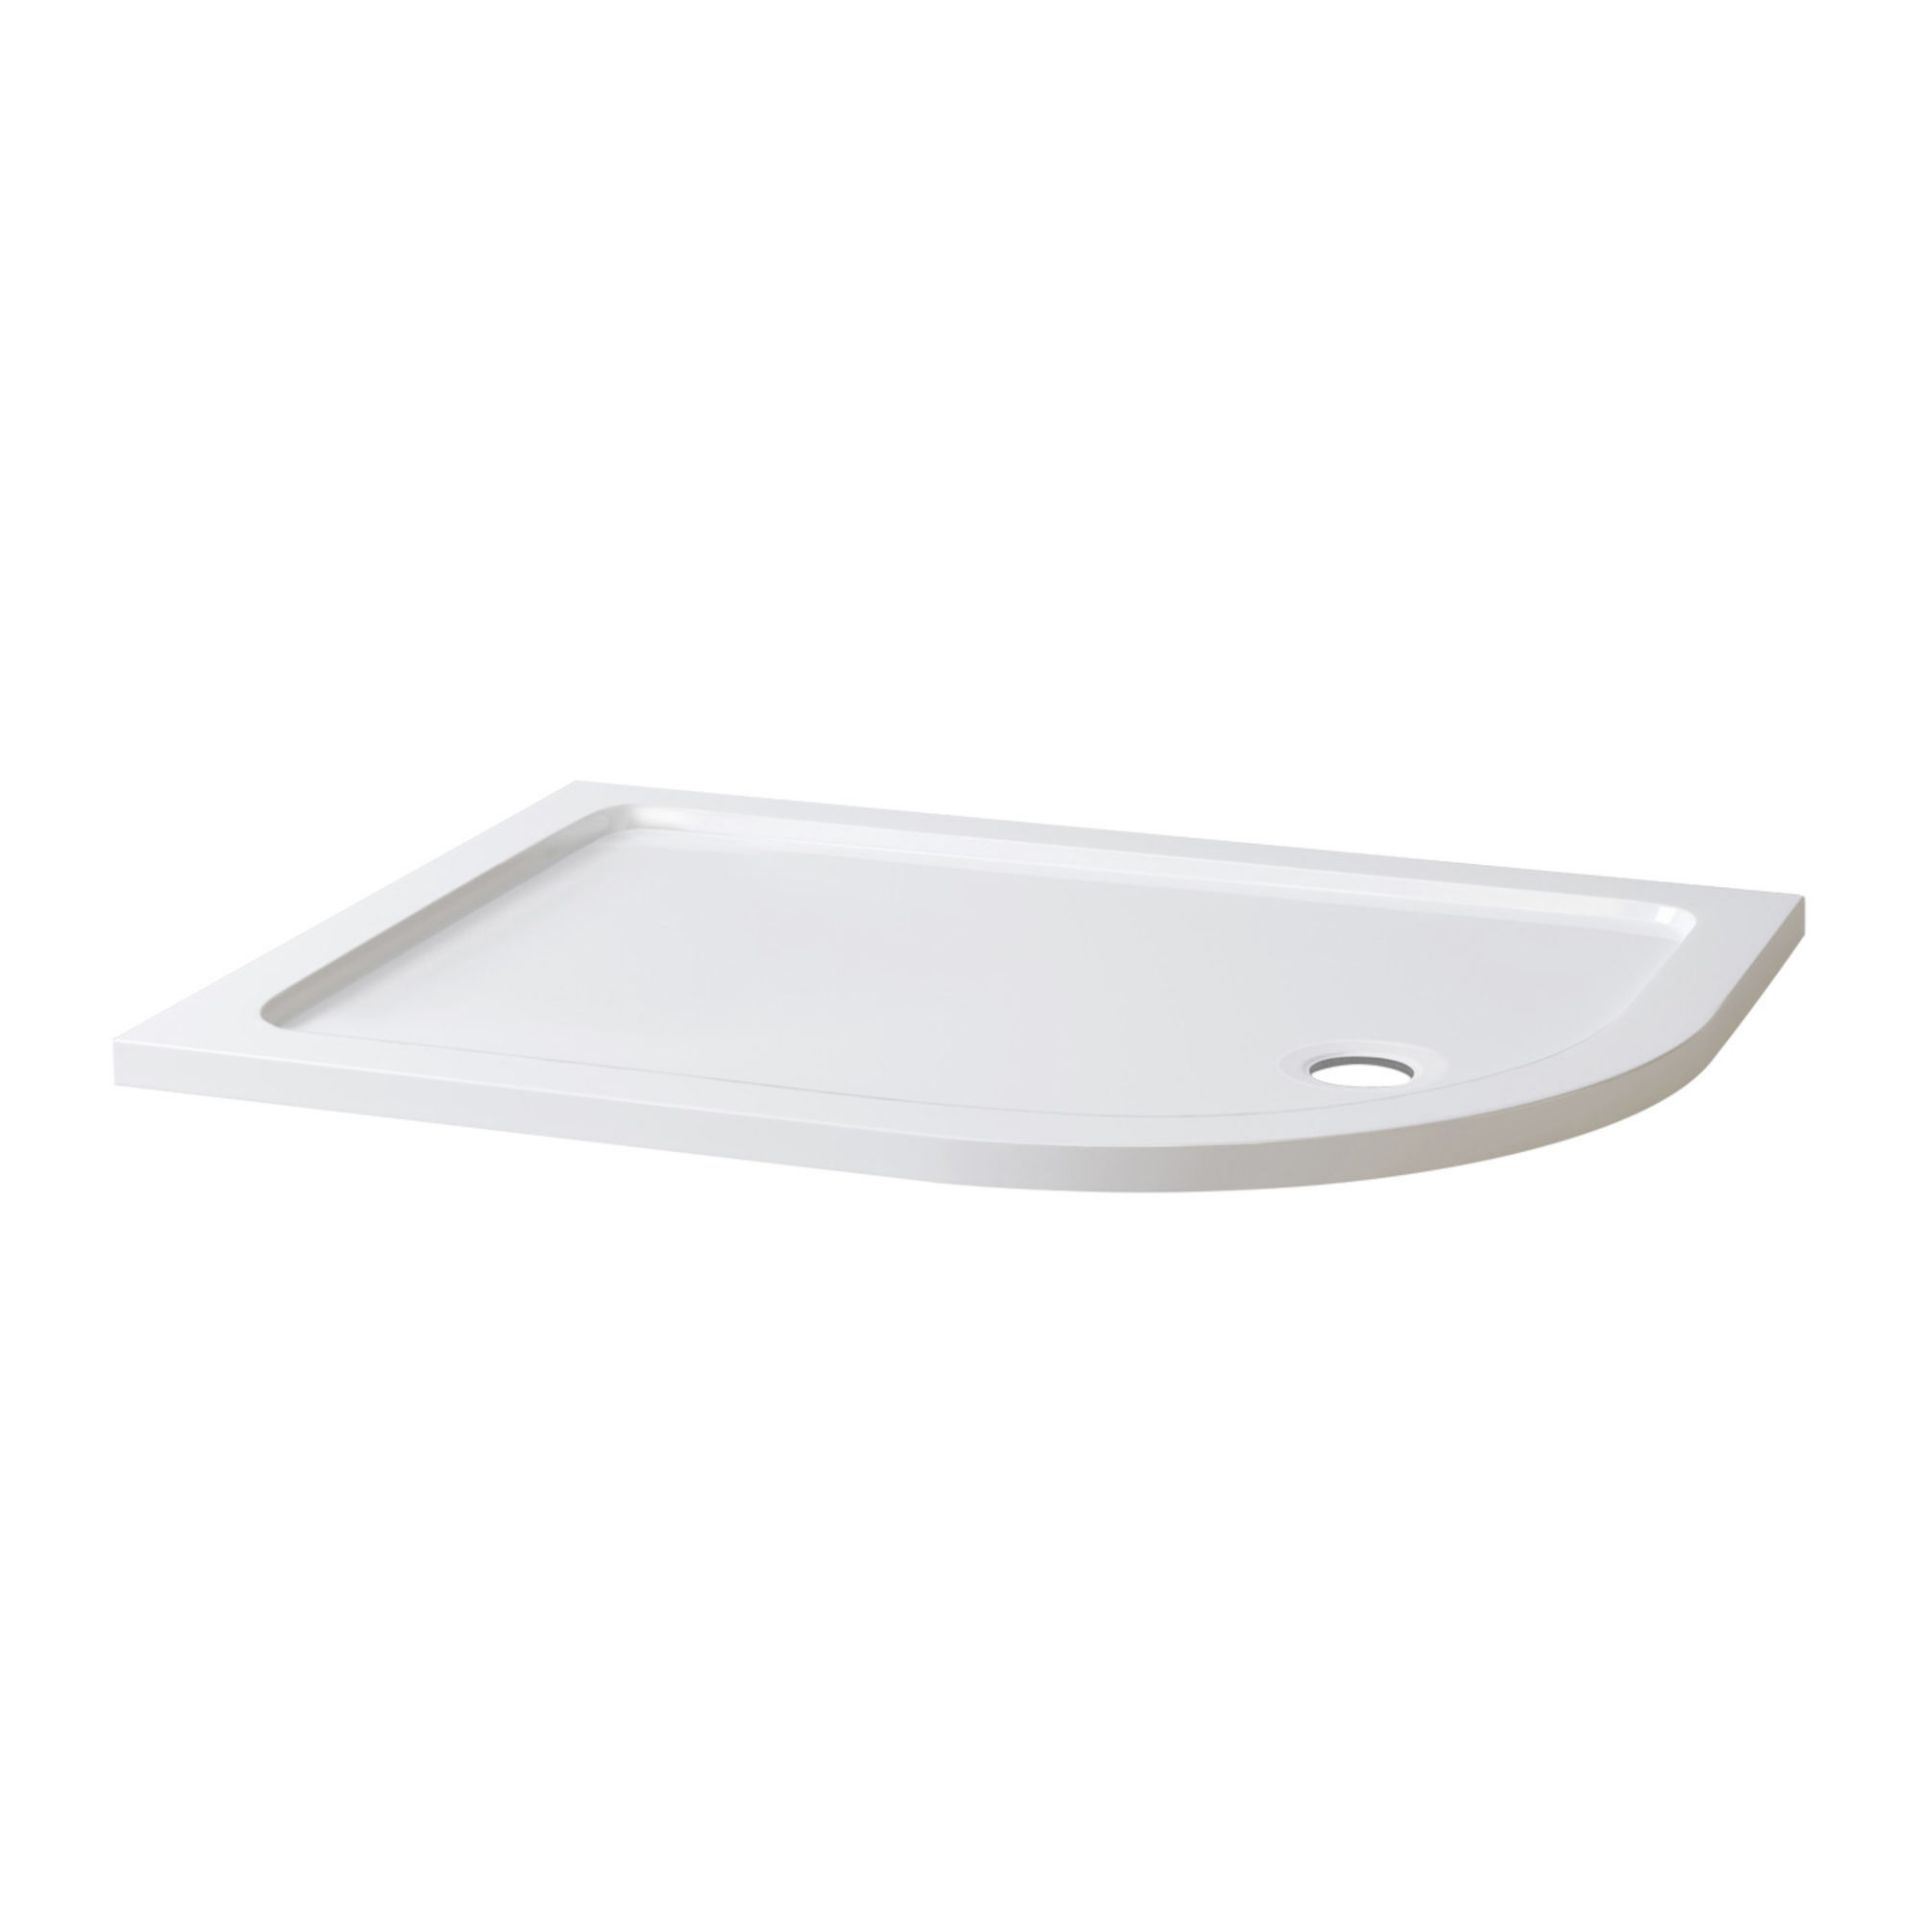 (AD54) 1200x900mm Offset Quadrant Ultra Slim Stone Shower Tray - Right. RRP £234.99. Low profile - Image 3 of 4